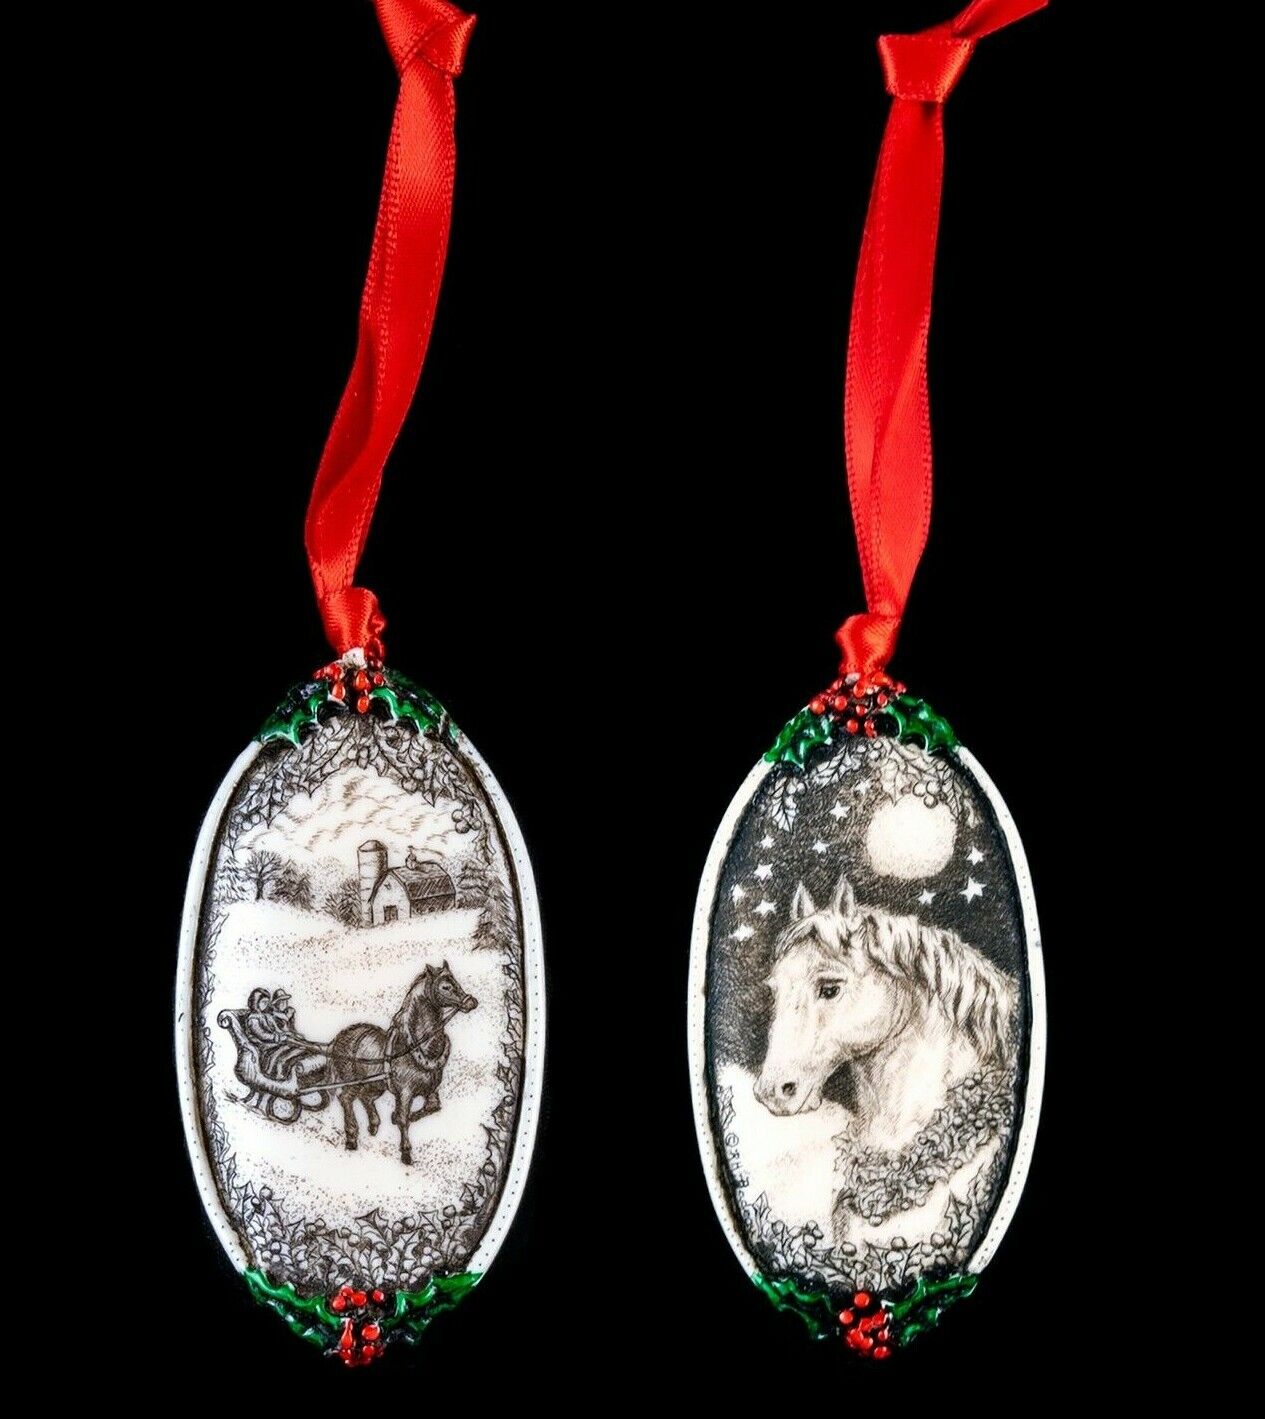 Double Sided Horse Themed Ornament.  Moosup Valley, Rachel Badeau, Etched